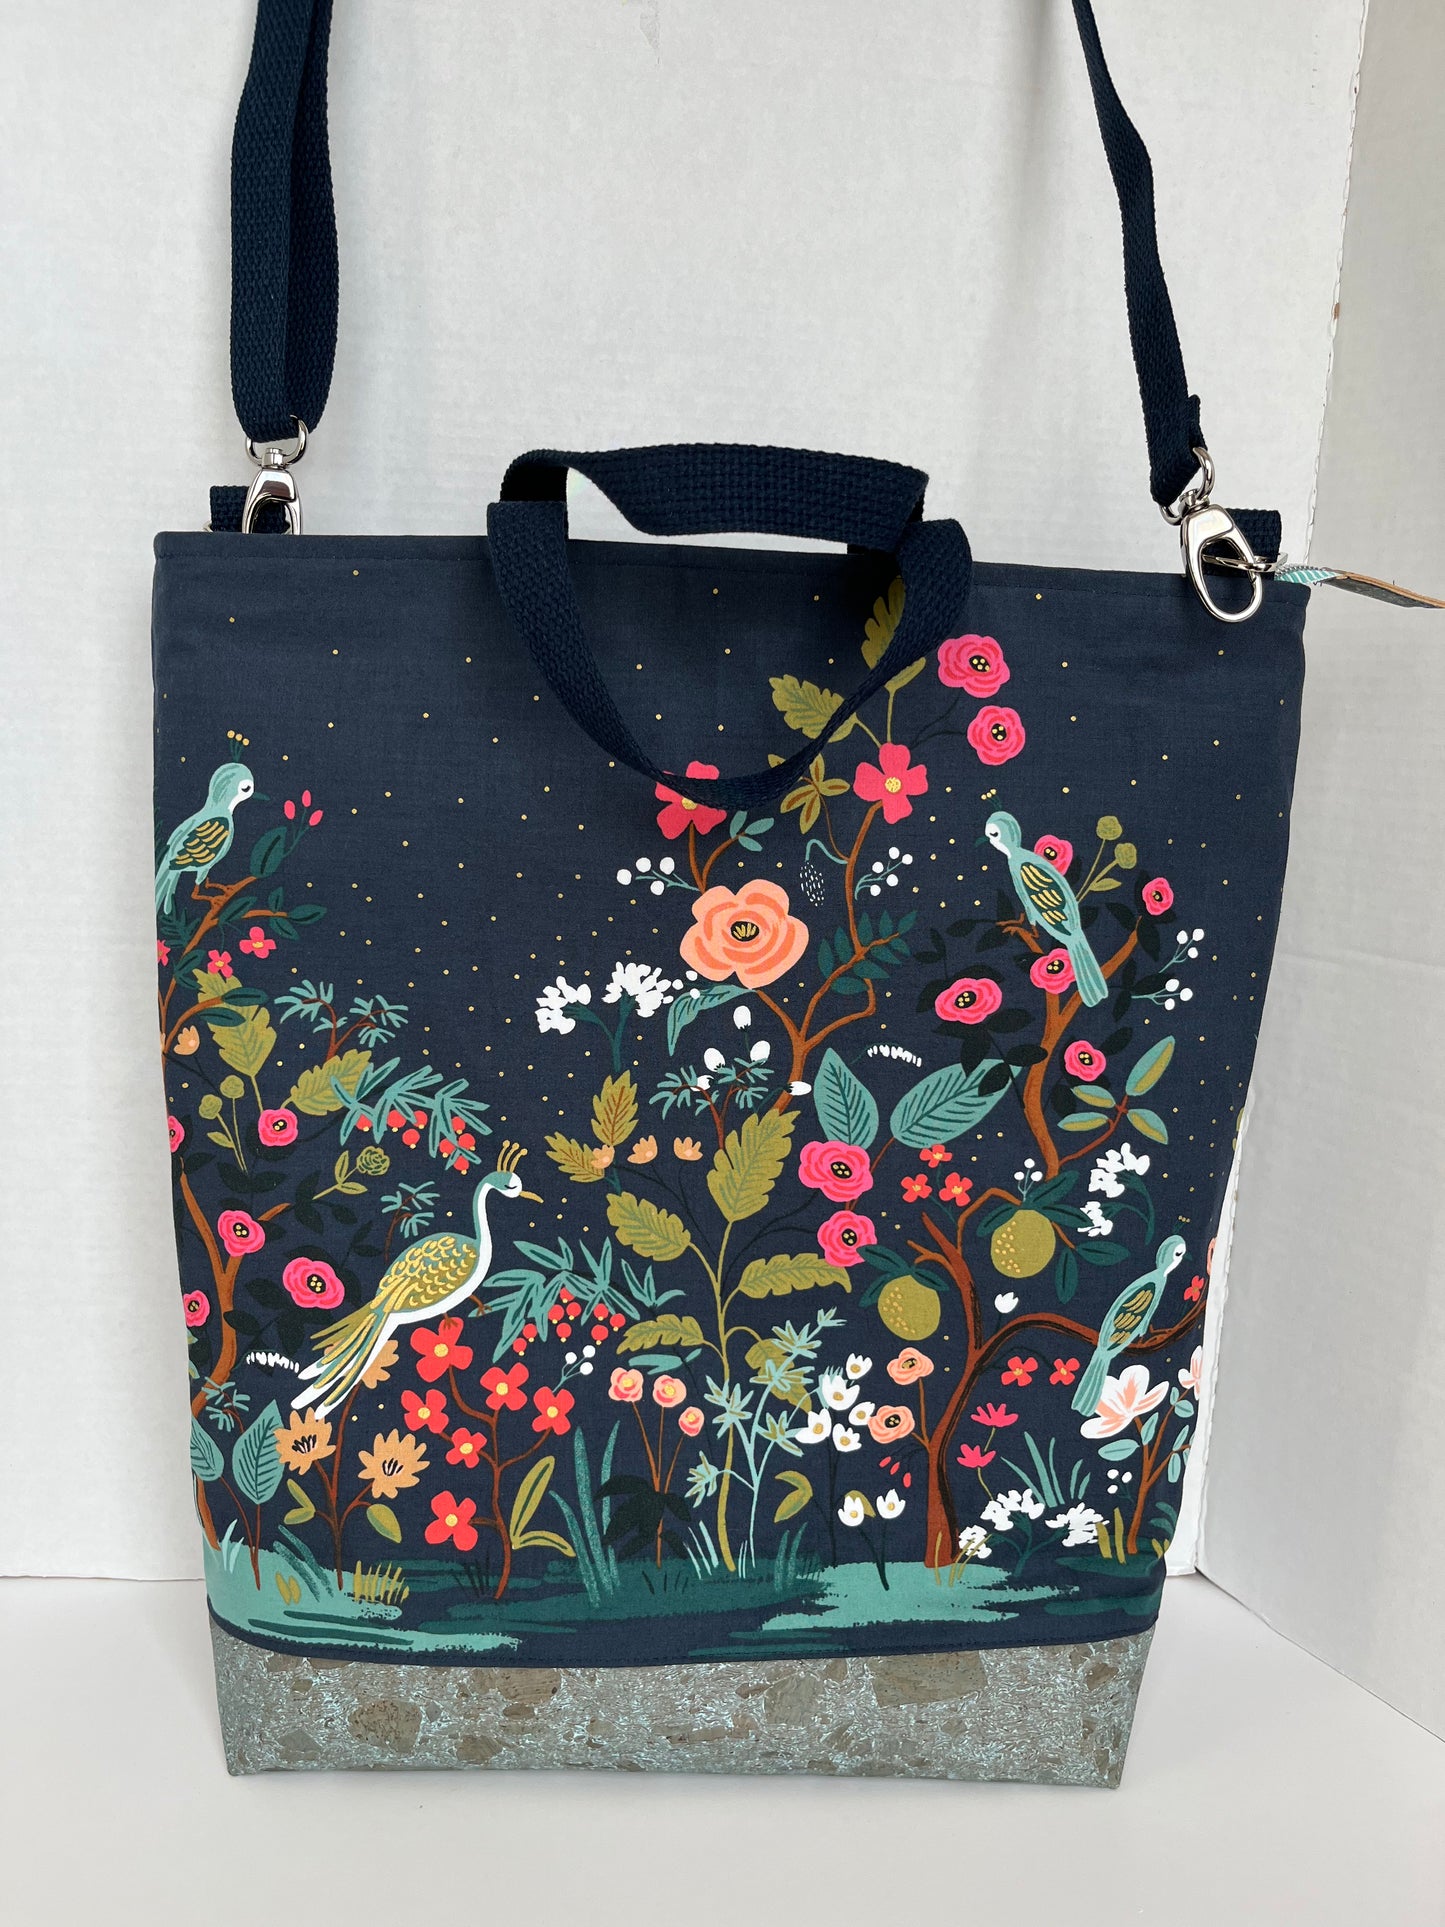 Large Cross body Tote Bag with Birds and Floral print